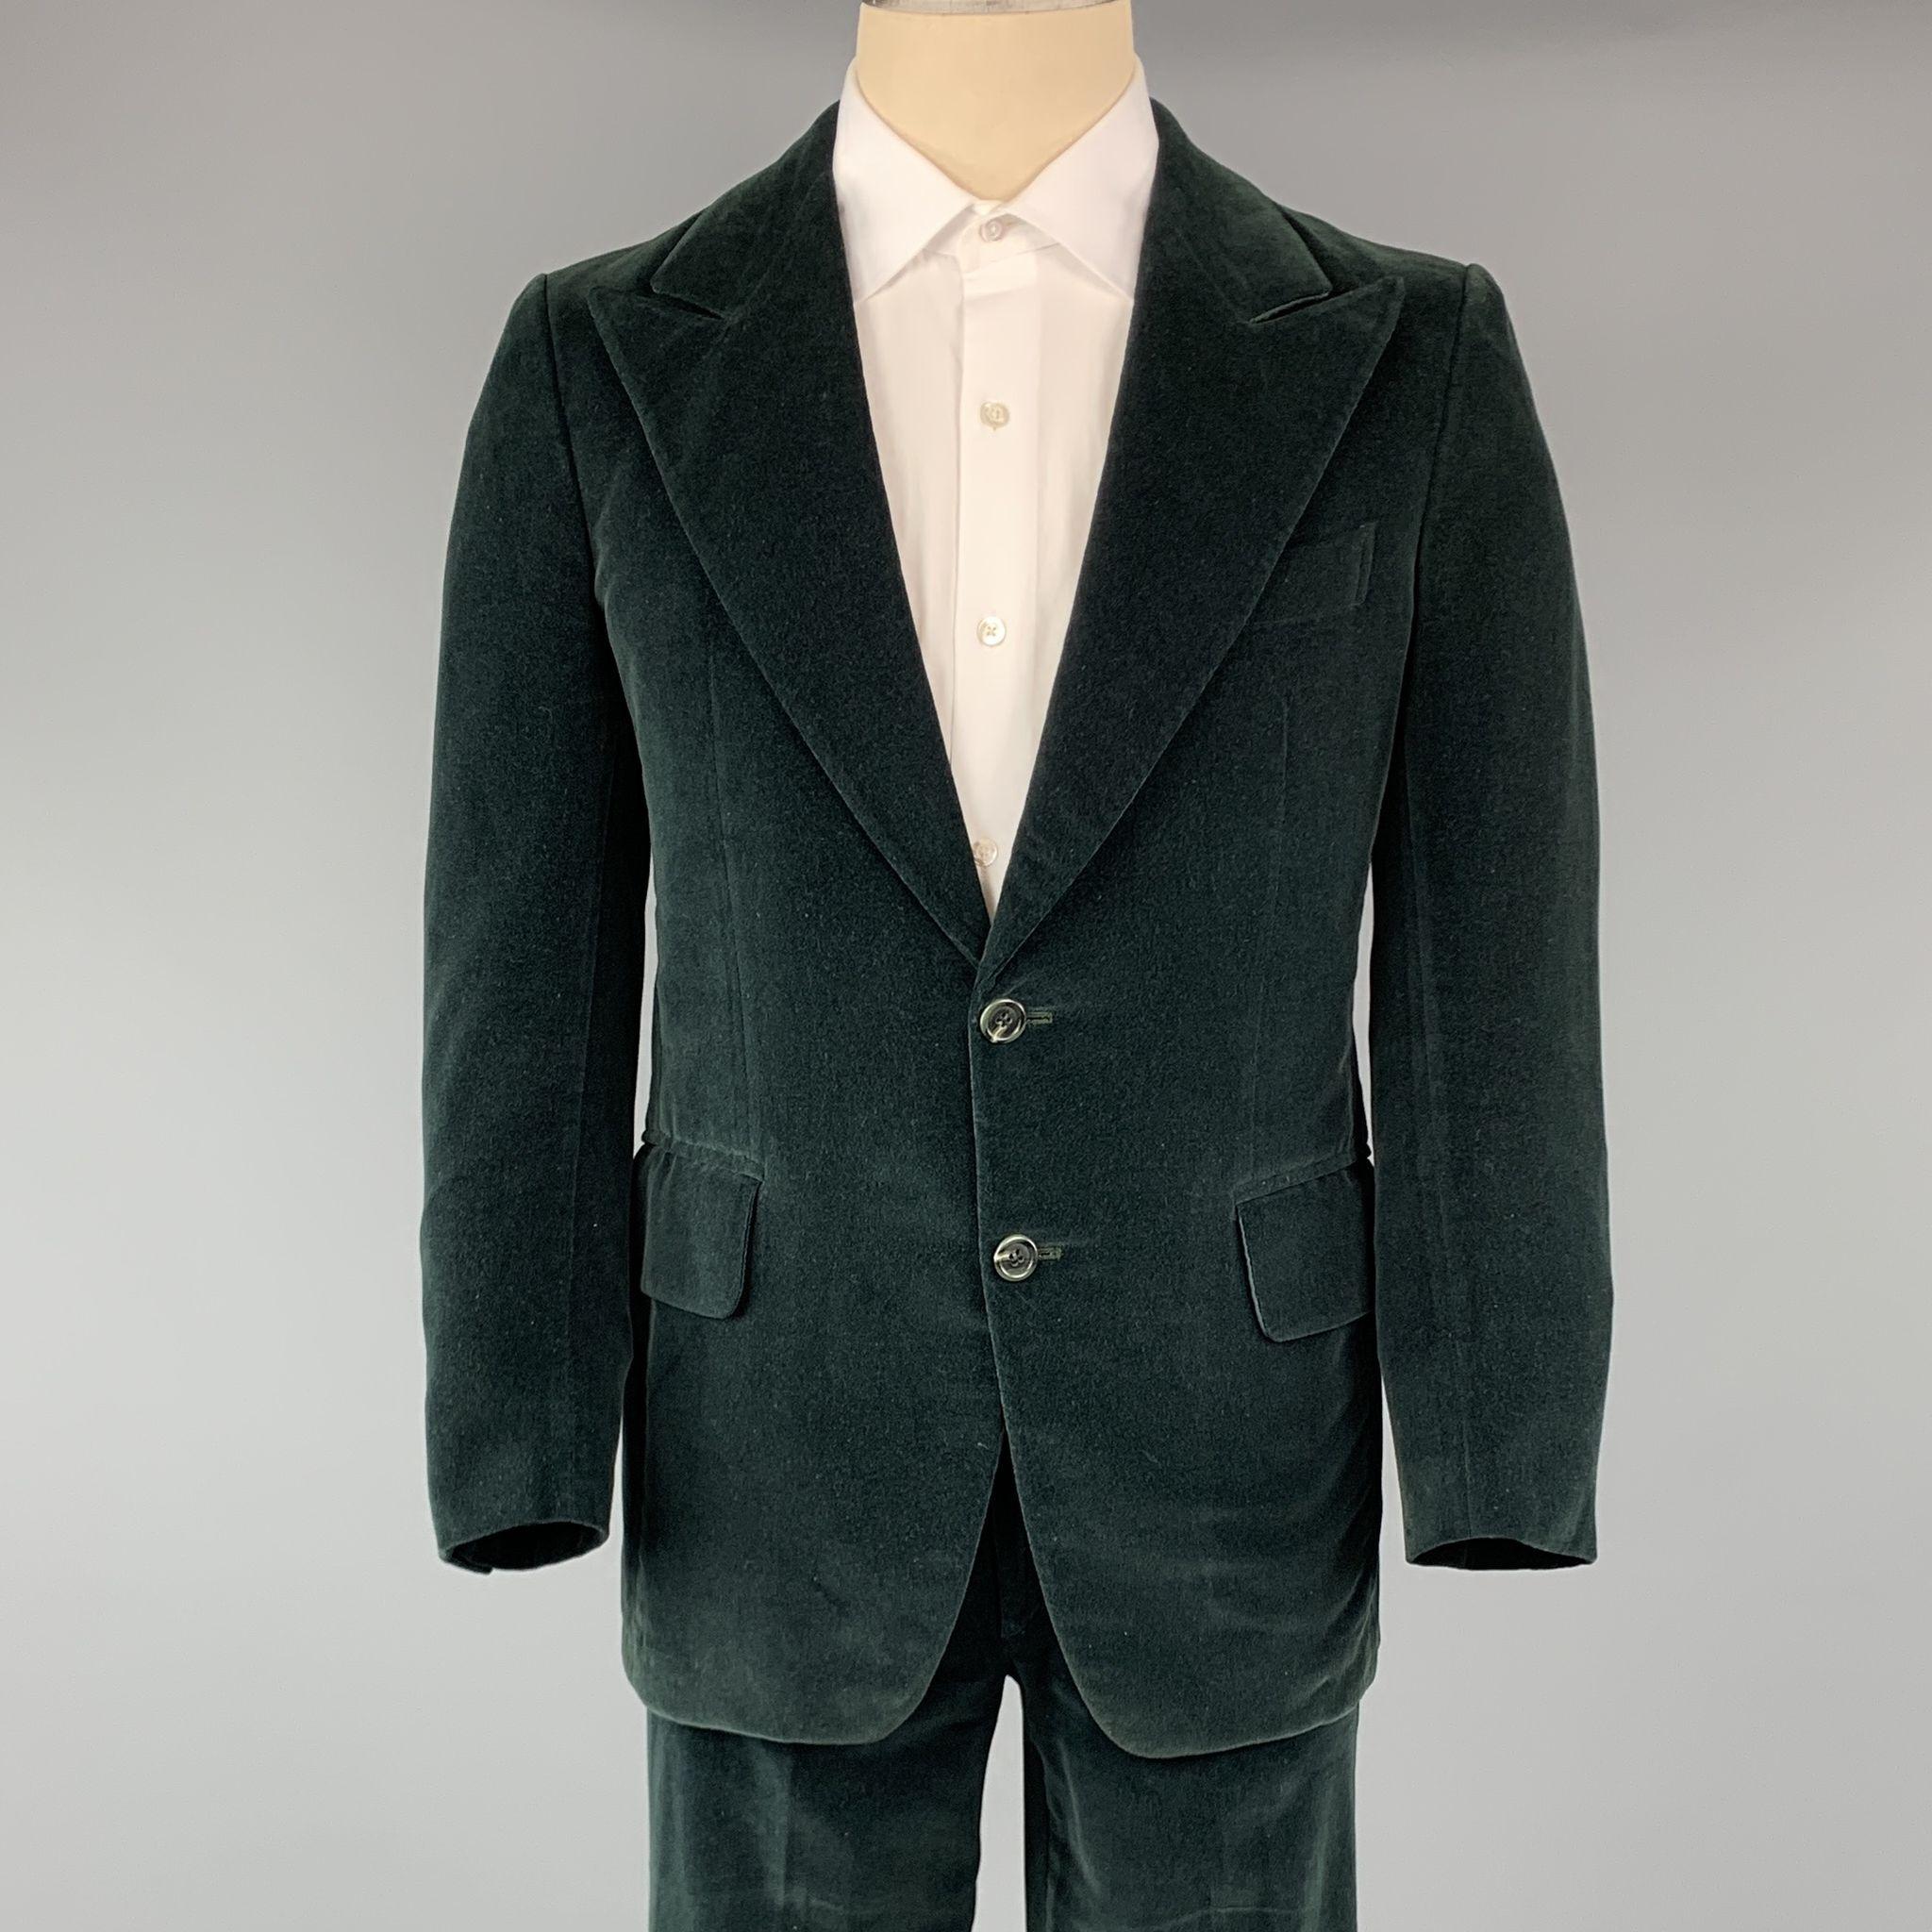 VINTAGE SAKS FIFTH AVENUE suit comes in a forest green velvet and includes a  single breasted, two button sport coat with a notch lapel and matching front trousers. (As-Is)

Good Pre-Owned Condition.
Marked: 38

Measurements:

-Jacket
l Shoulder: